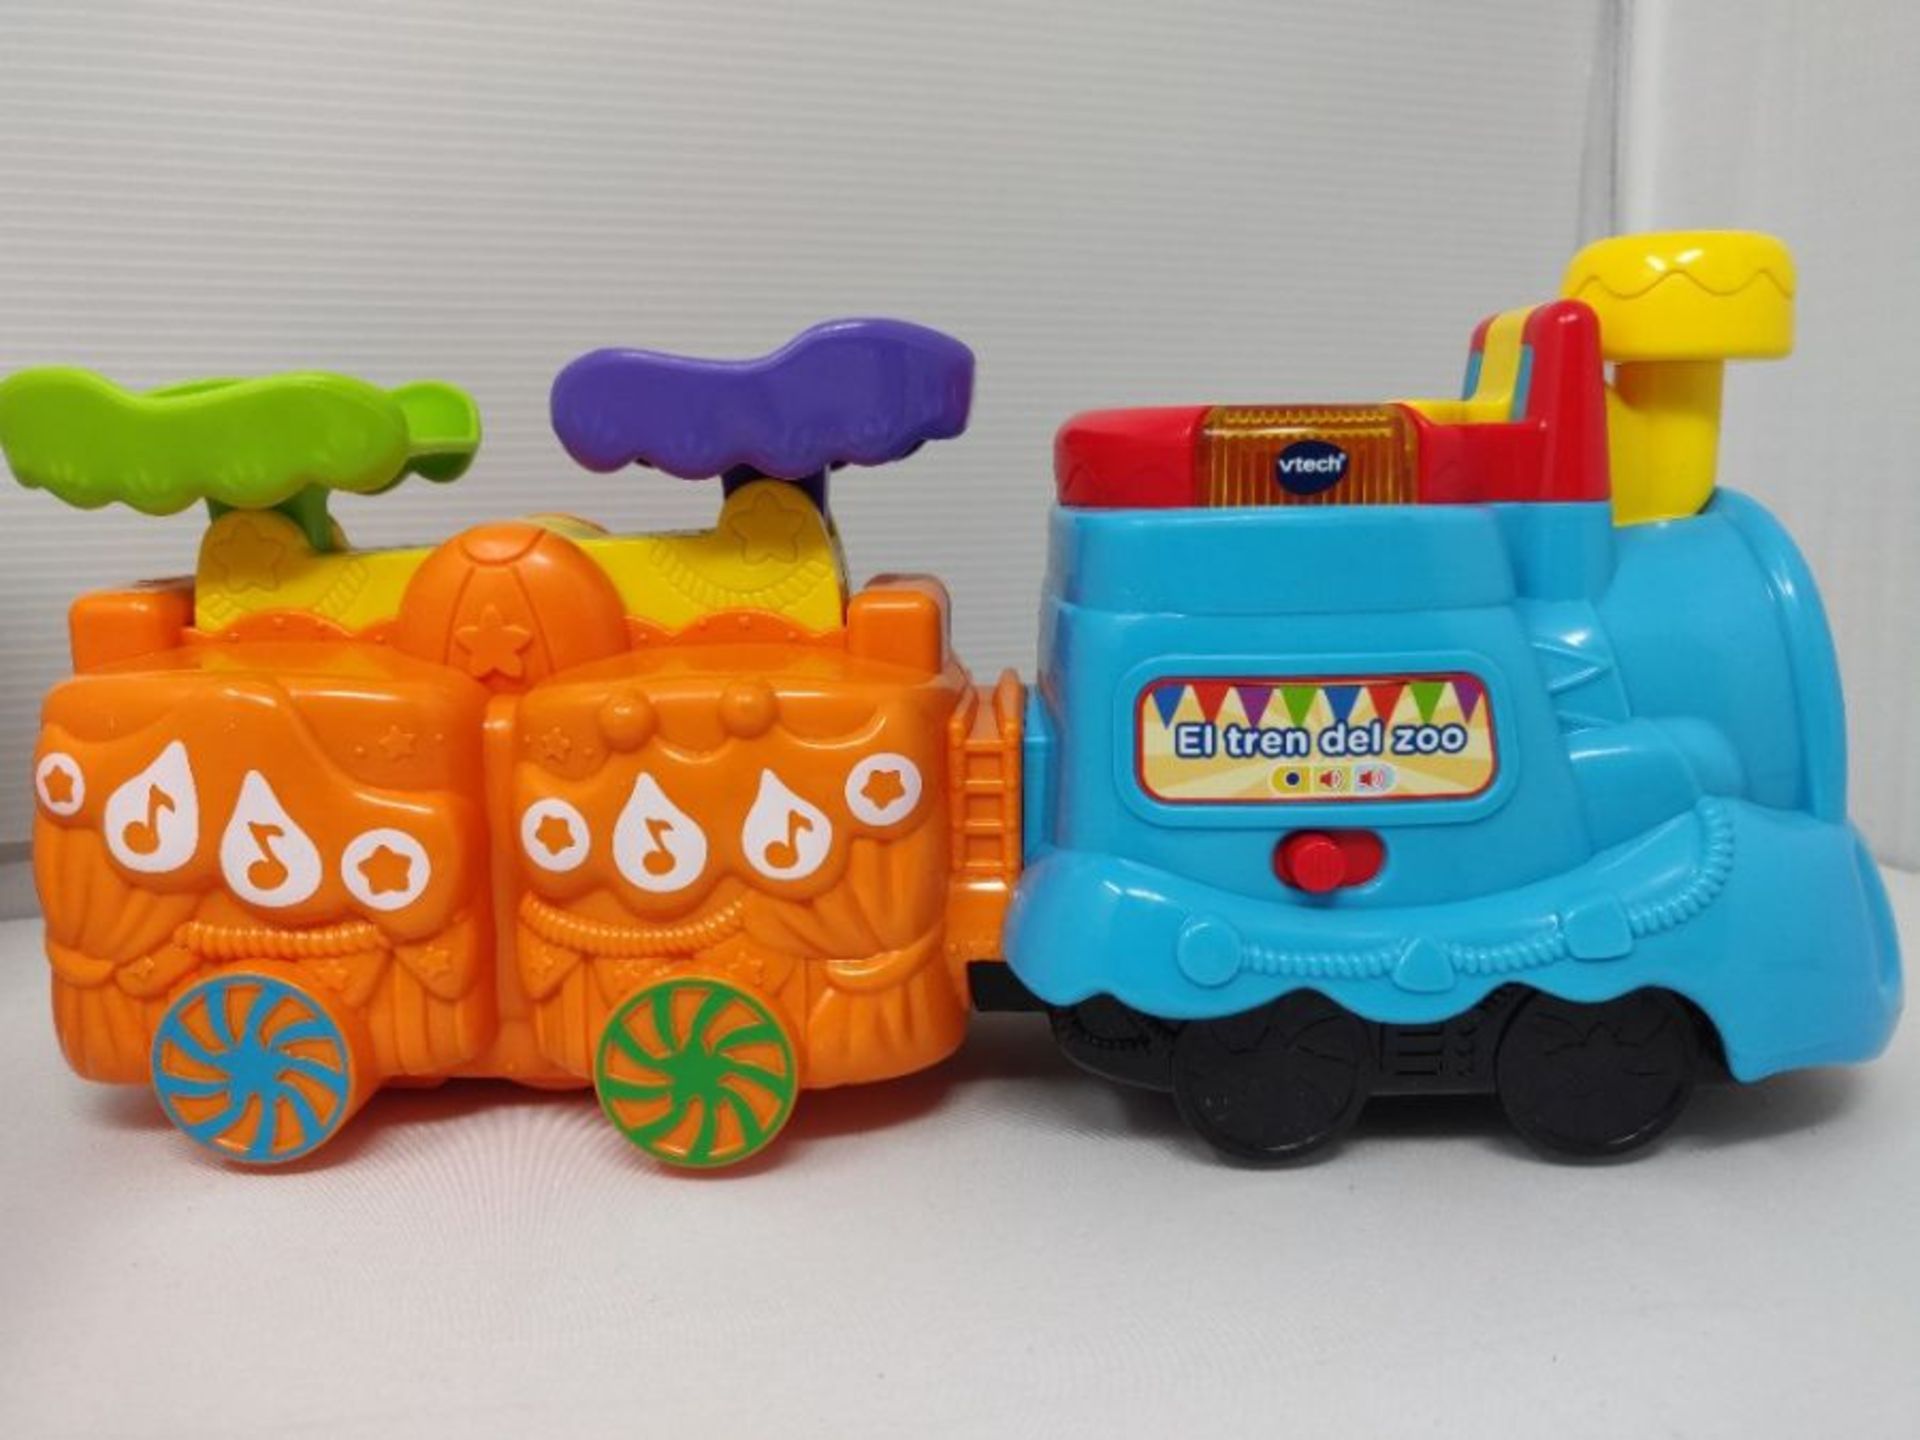 VTech Zoo Train + 2 Zoomizooz, Colour (3480-516522), Assorted Colour/Model - Image 2 of 3